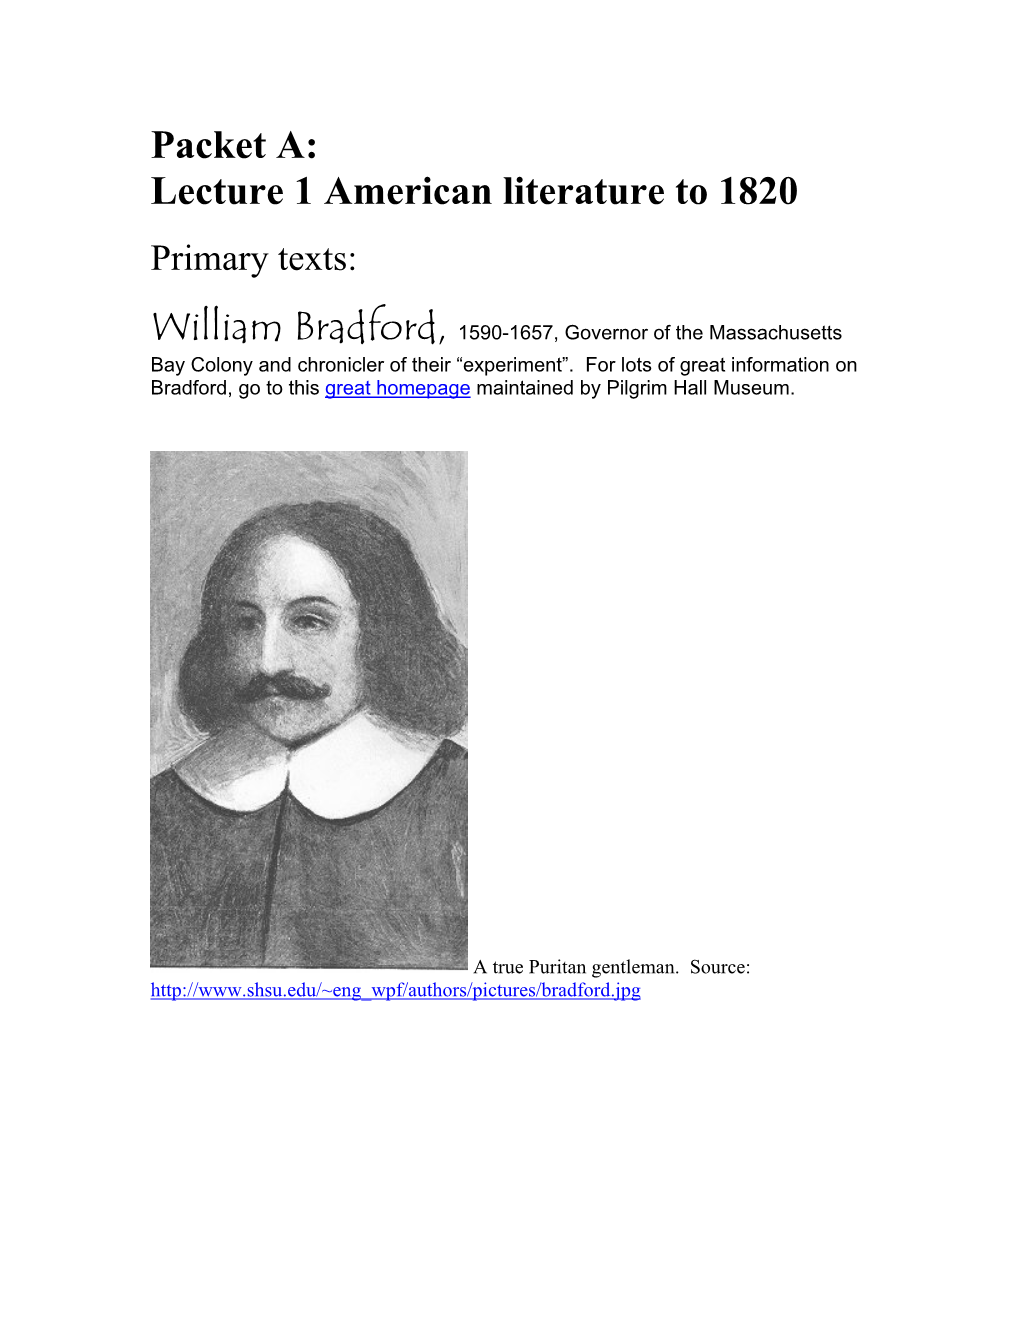 Packet A: Lecture 1 American Literature to 1820